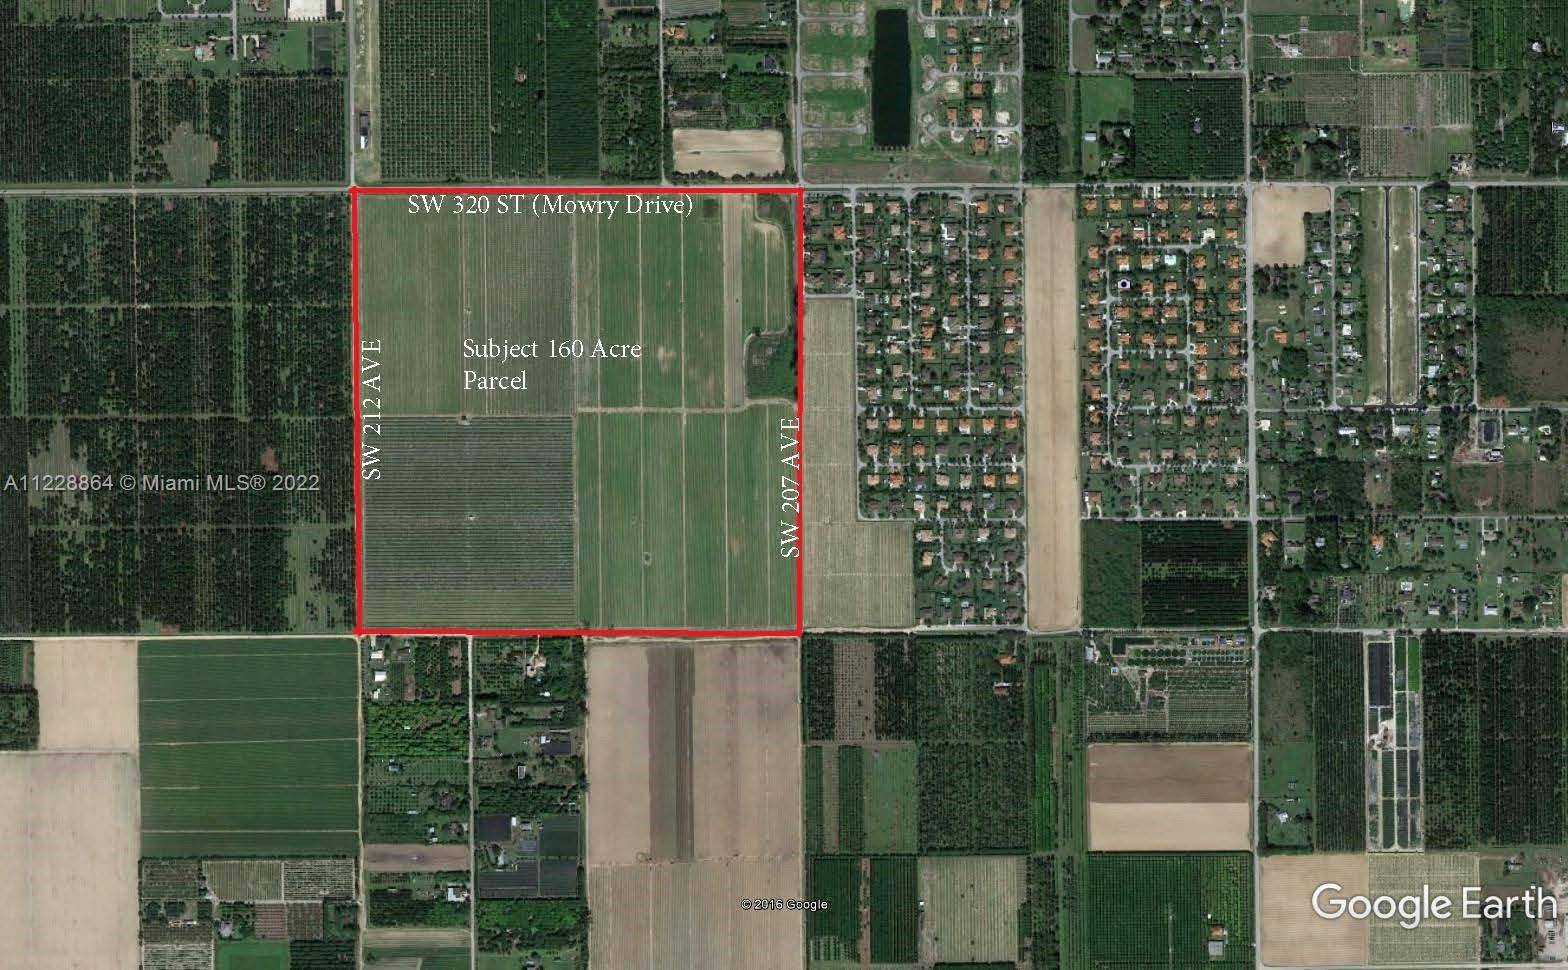 160 Acres of Agriculture land with rights to build on every 5 Acre parcel, possibility of rezoning to build on every 19, 000 sqft.